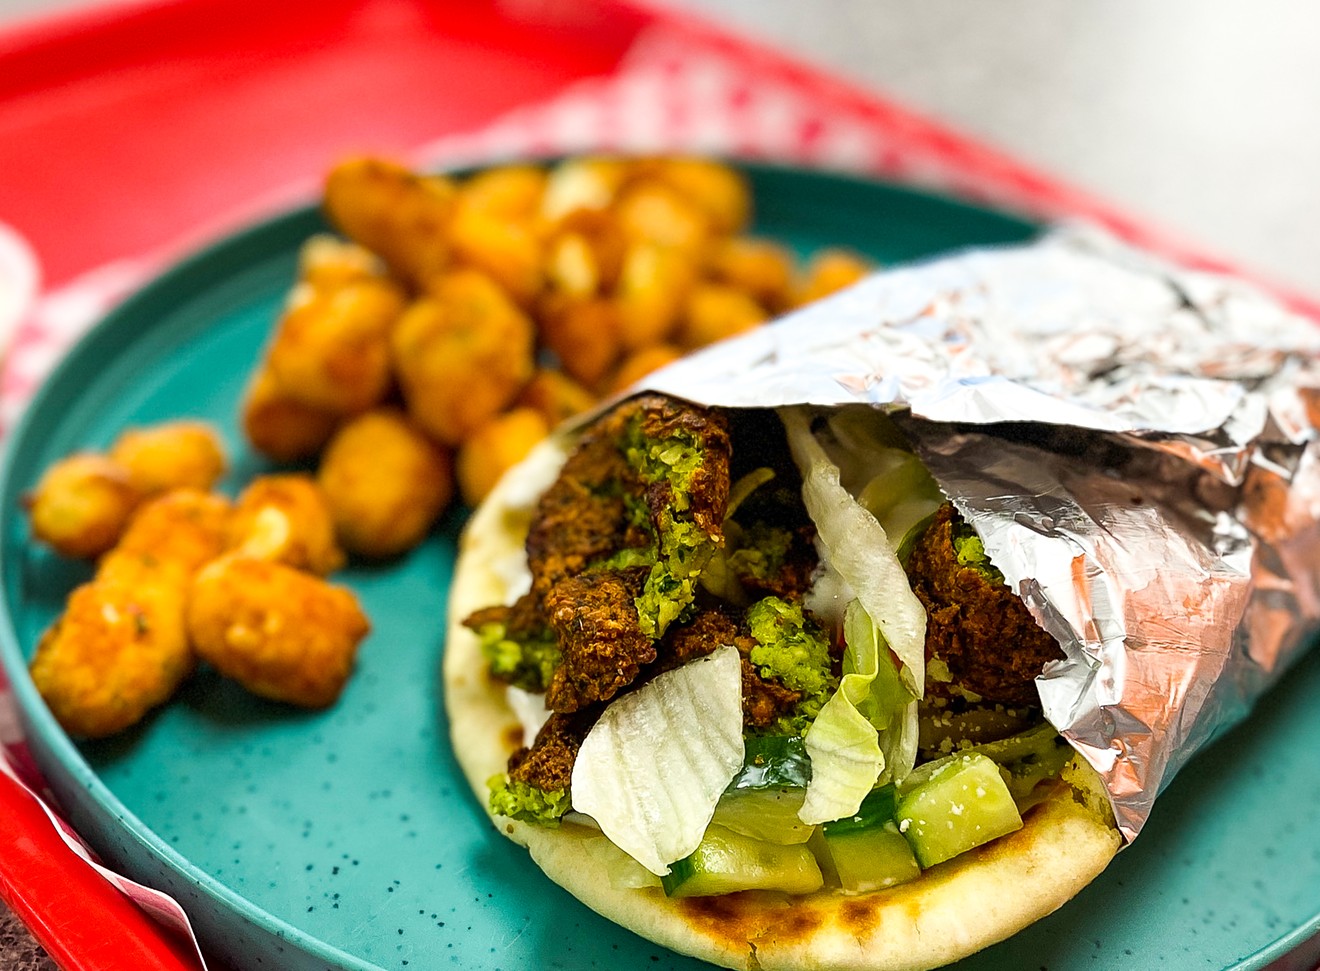 Falafel sandwich and fried garlic cheese curds provide great value and taste at Gyro Hot in Far North Dallas